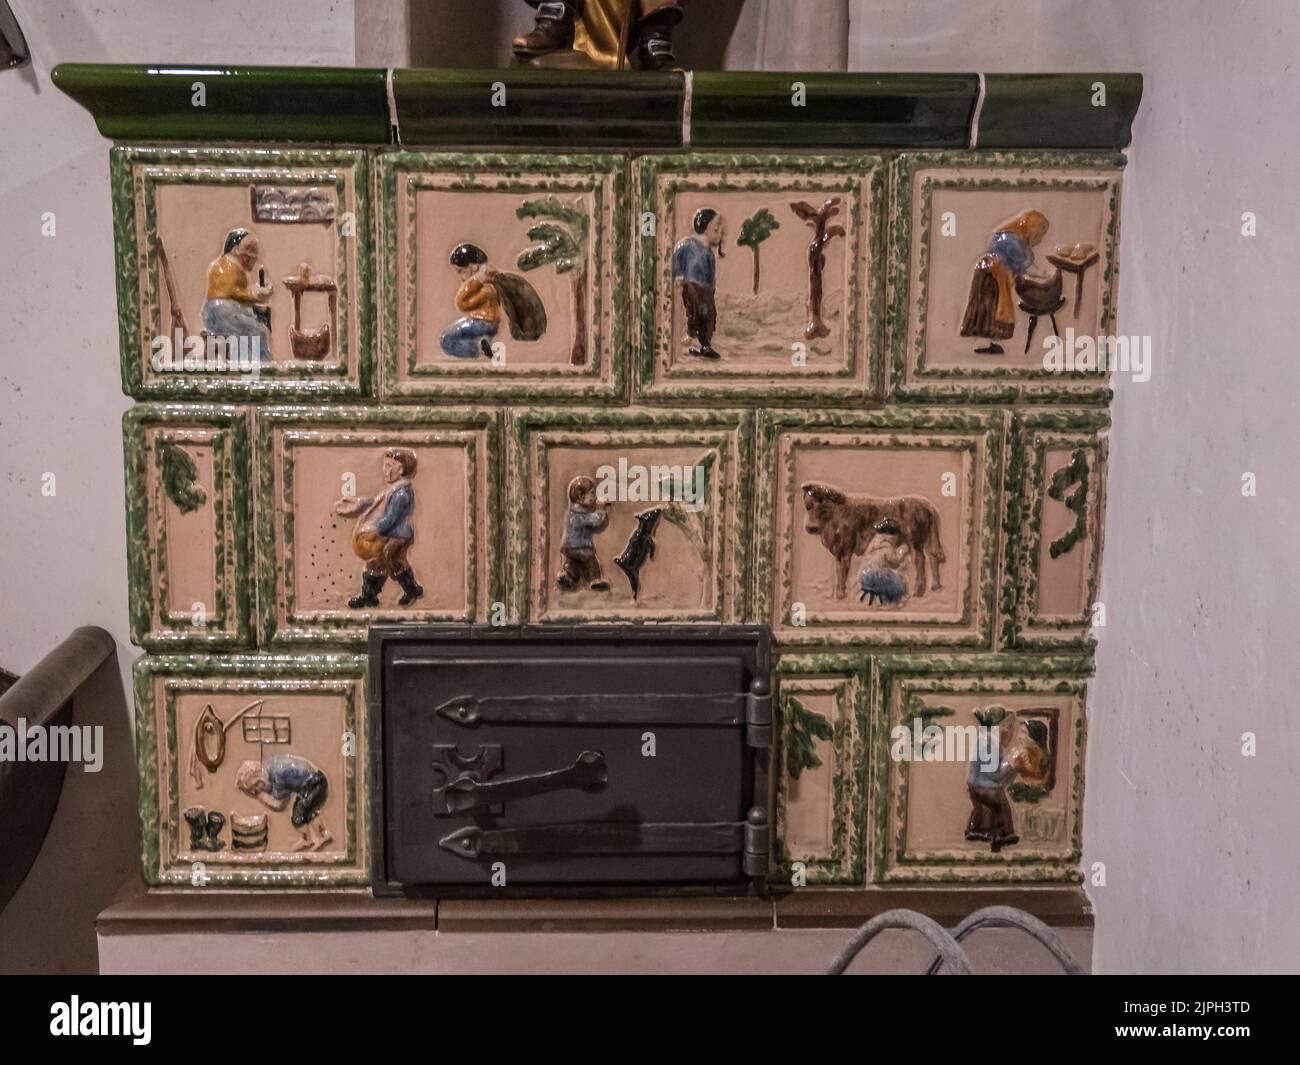 The image is of a Kuchel wood burning stove that is typical within Austrian Tirolean culture with this example depicting various farming scenes Stock Photo